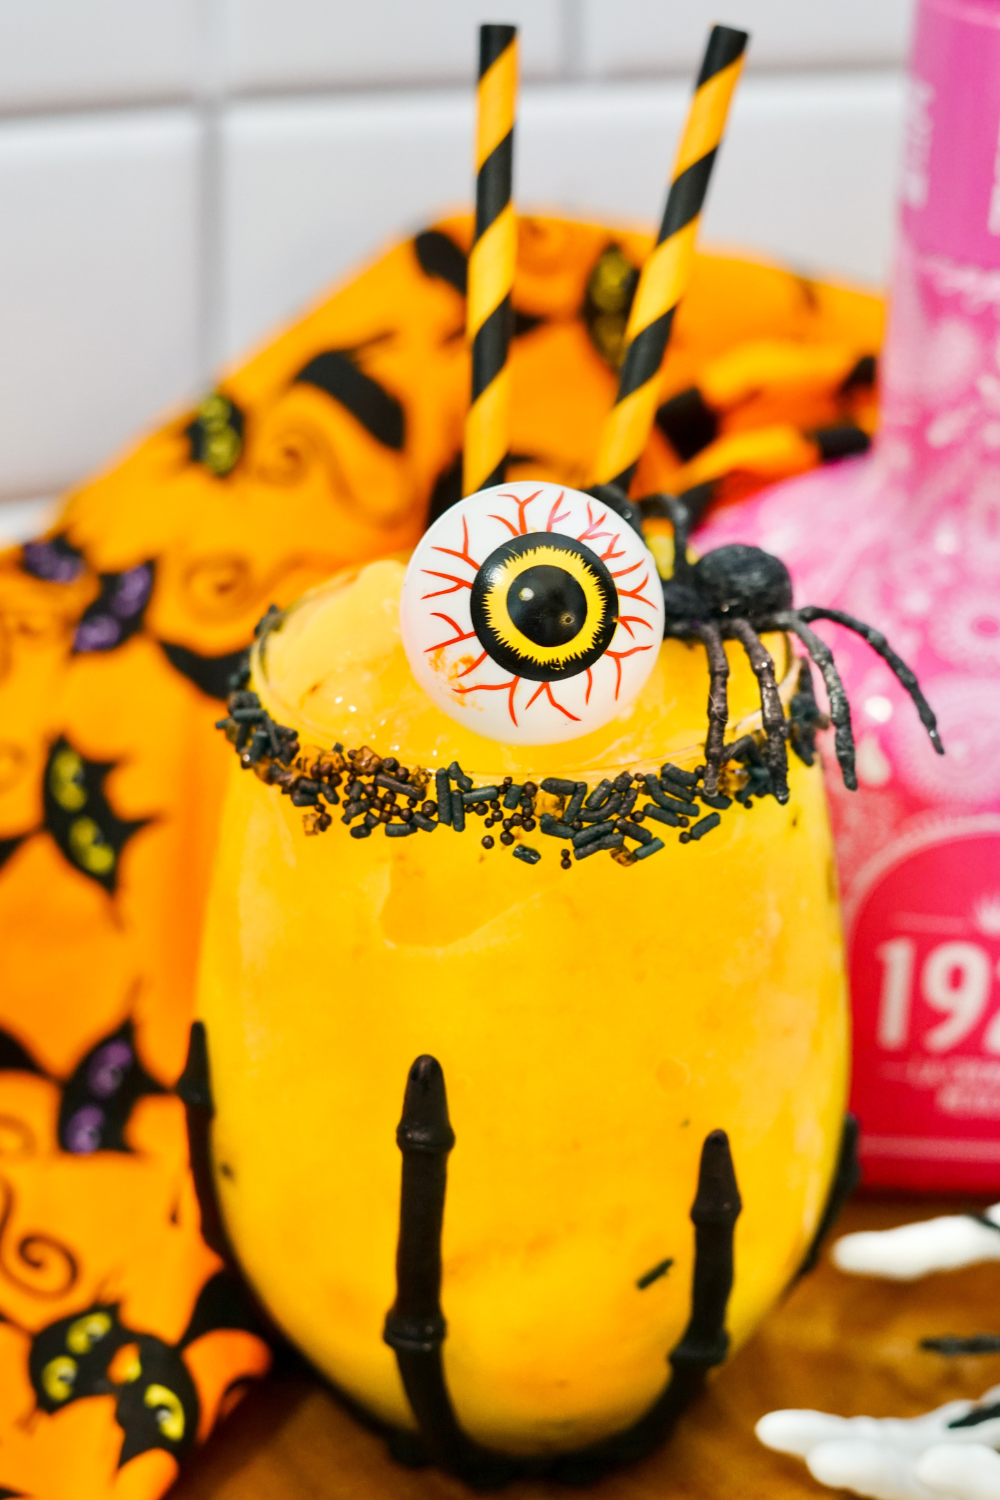 Orange mango margarita with black sprinkles rimming the glass. This Halloween margarita is garnished with a spooky eyeball and a black spider!